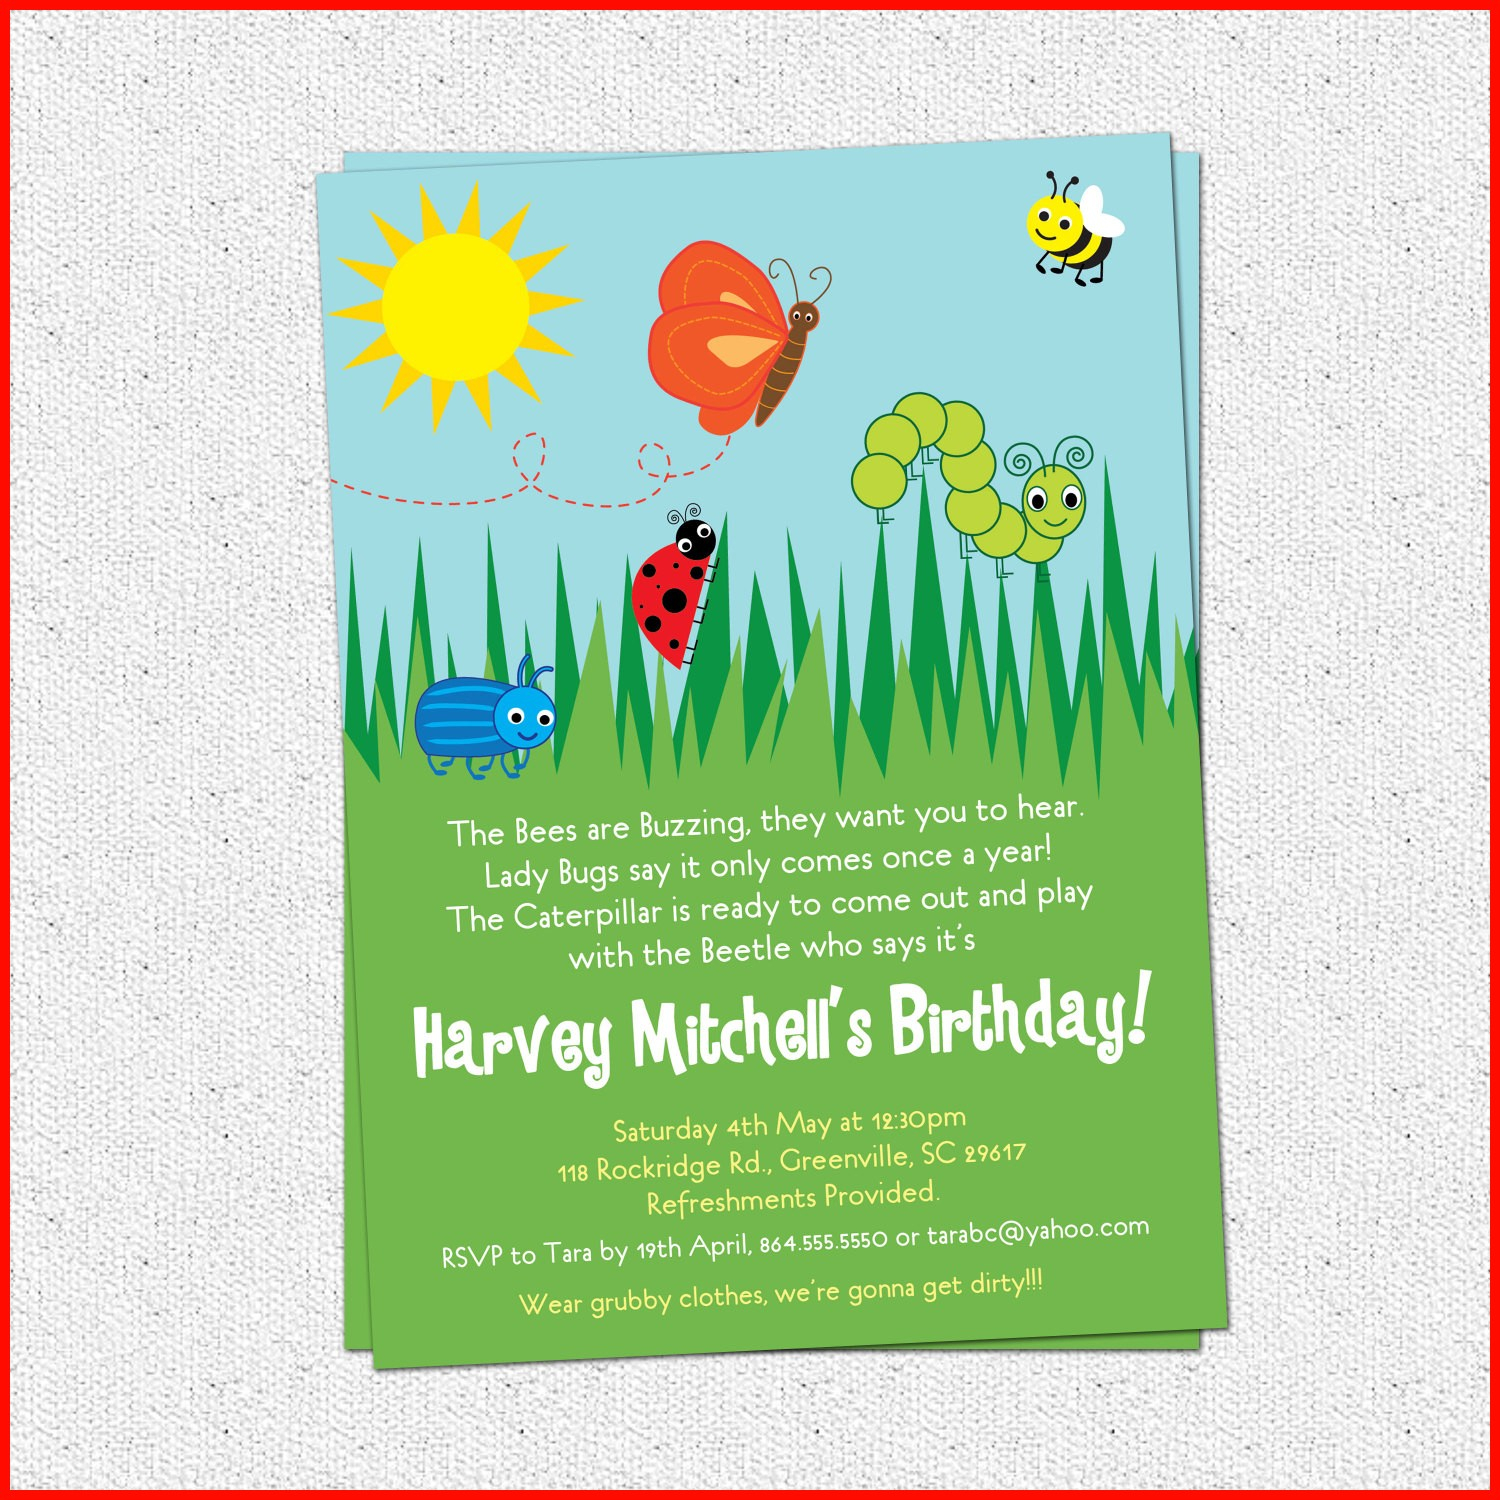 Awesome Insect Birthday Party Invitations Image Of Birthday with proportions 1500 X 1500